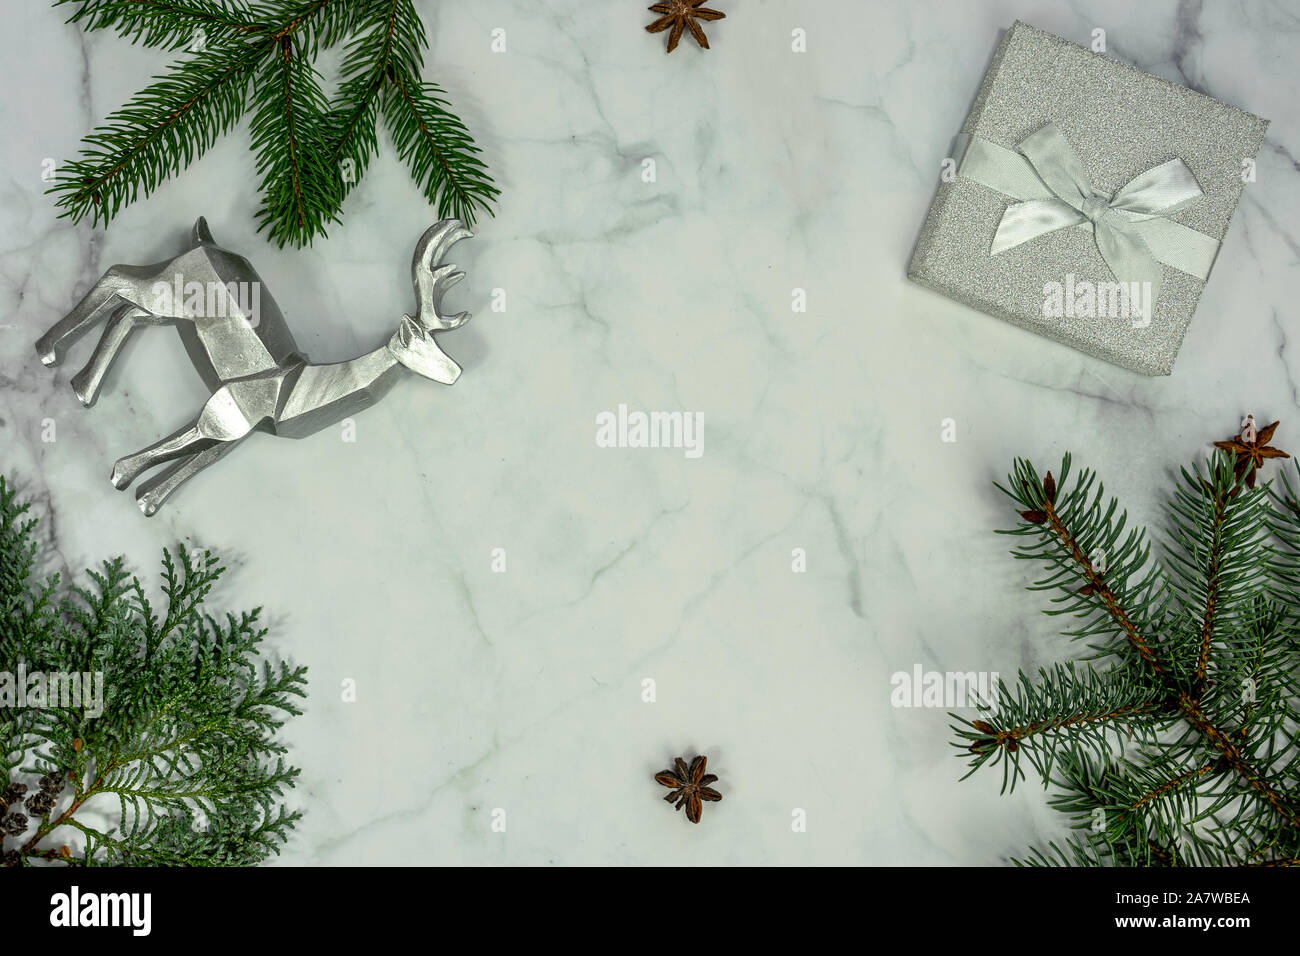 Christmas frame background on marbel with silver decoration and gift box . Stock Photo